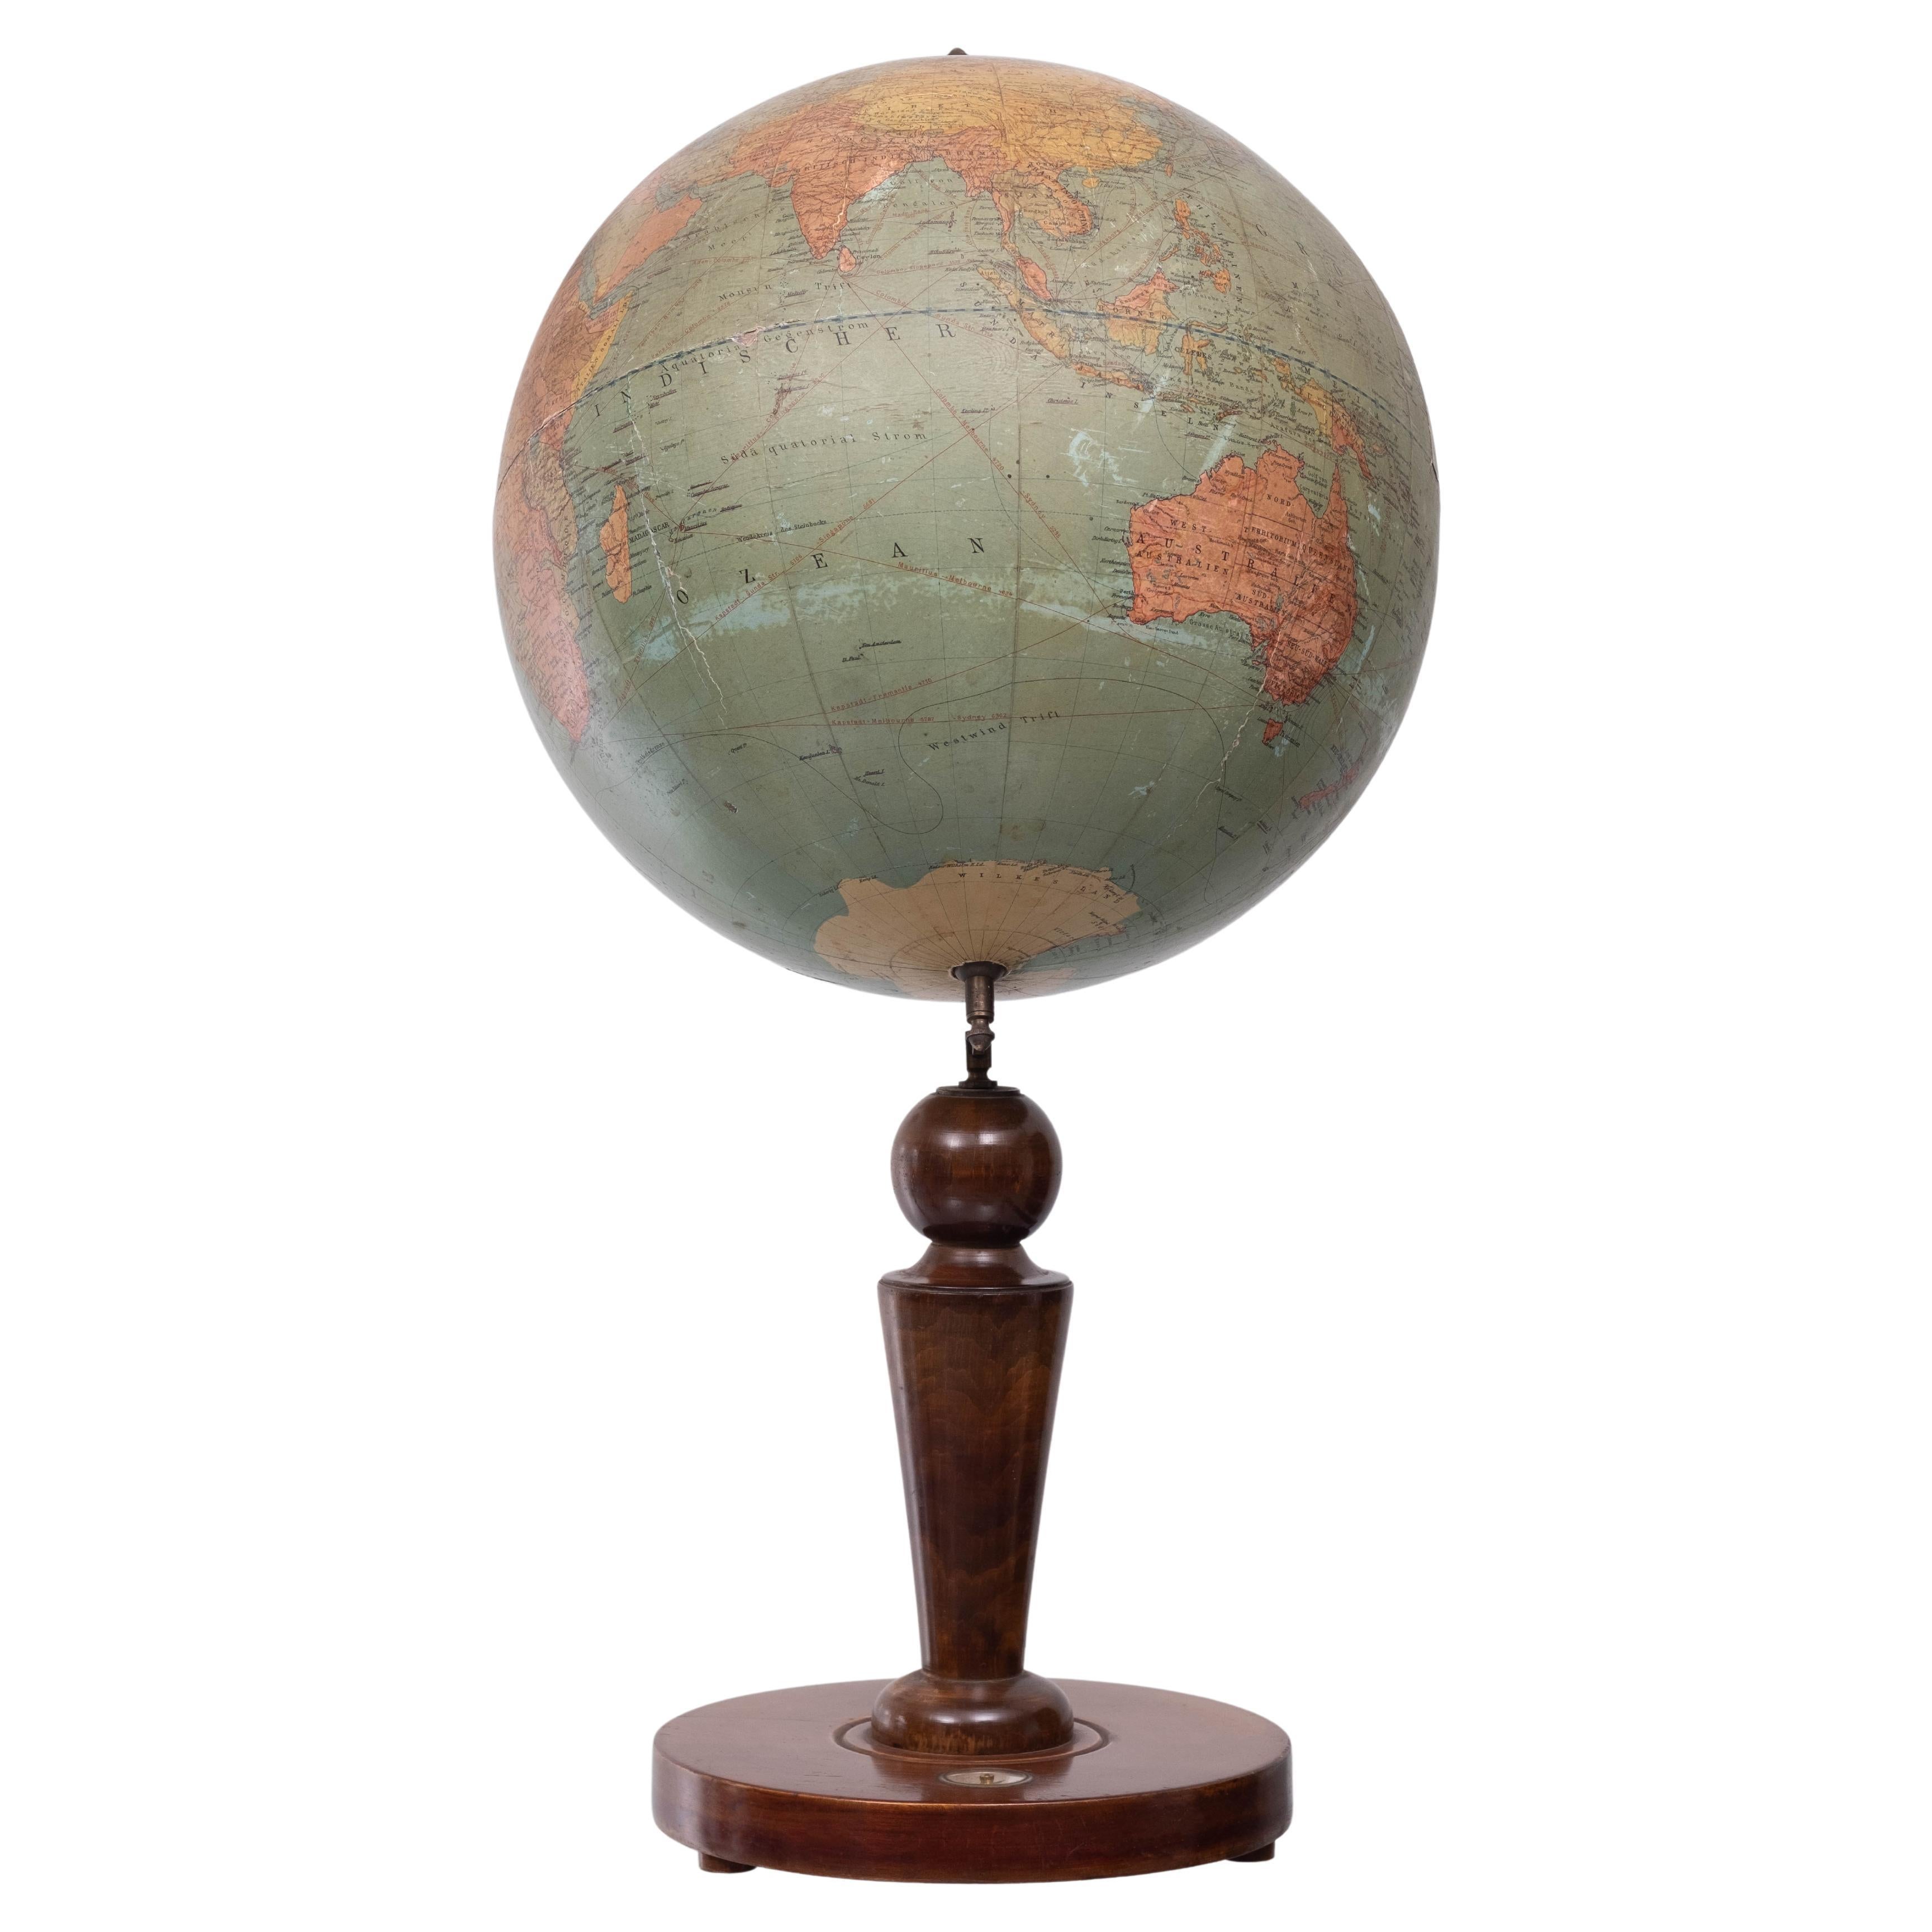 German table Erdglobus der Deutschen Buch-Gemeinschaft by Dietrich Reimer Ernst Vohsen Berlin 
1920/30 Wooden globe with a lithograph on paper. On a walnut stand comes with a little compass in the base.
Original piece. This globe is in a used